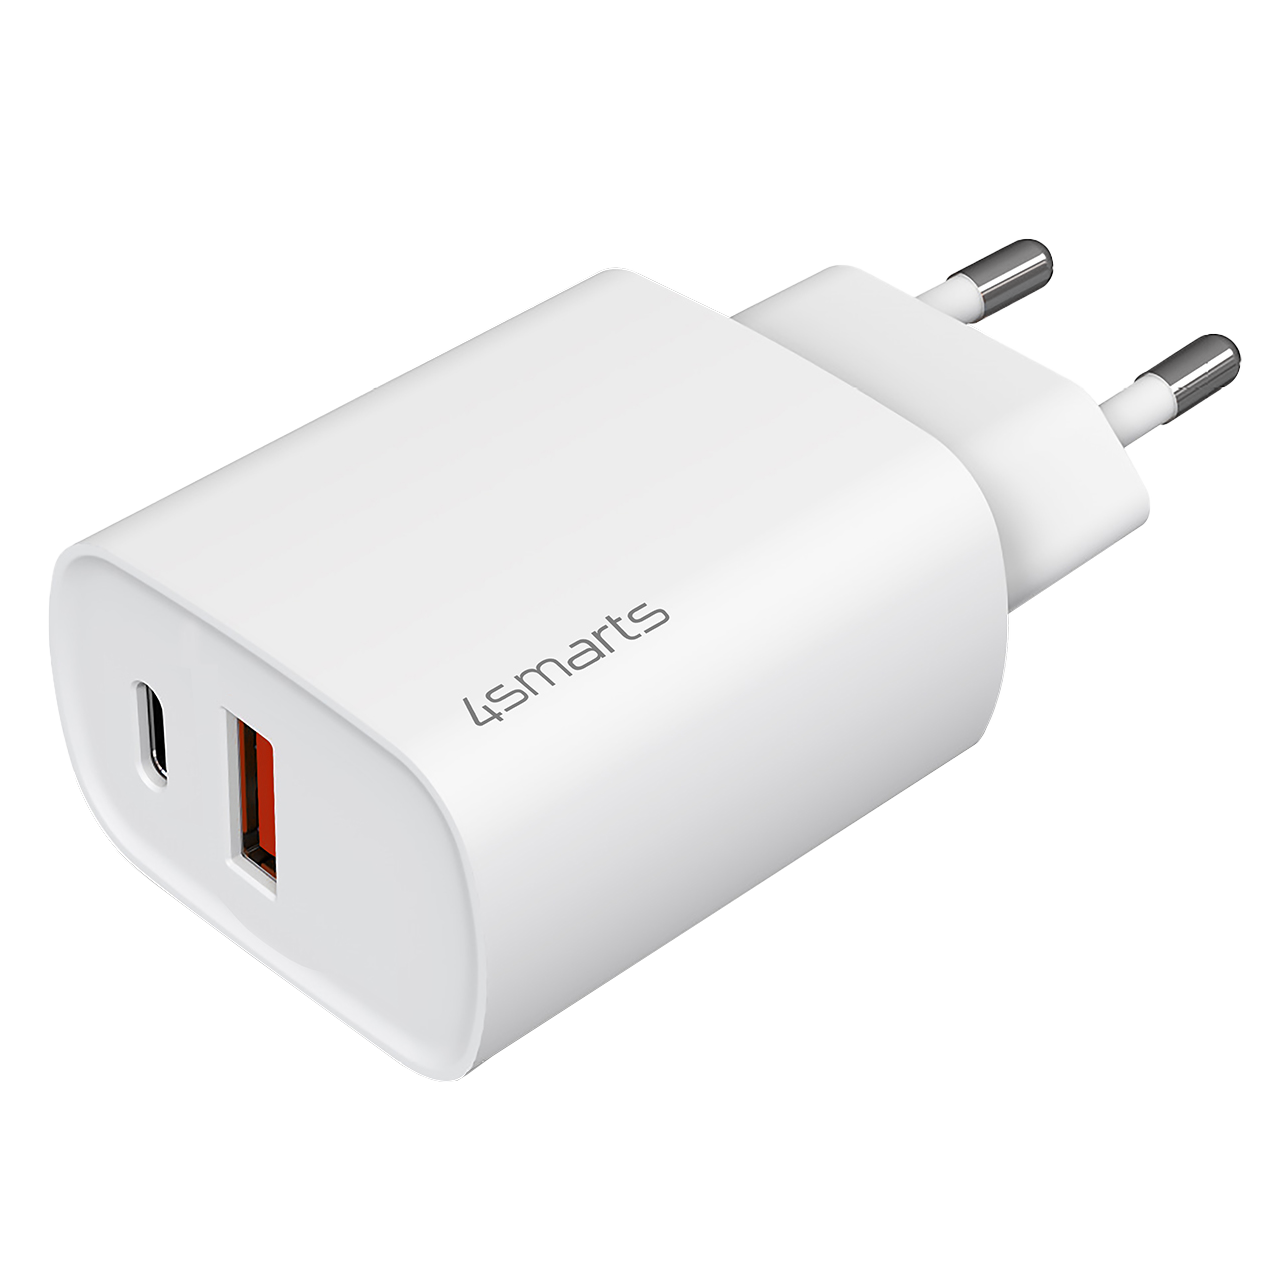 iPhone USB/USB-C adapter 25W kopen? - in | Partly